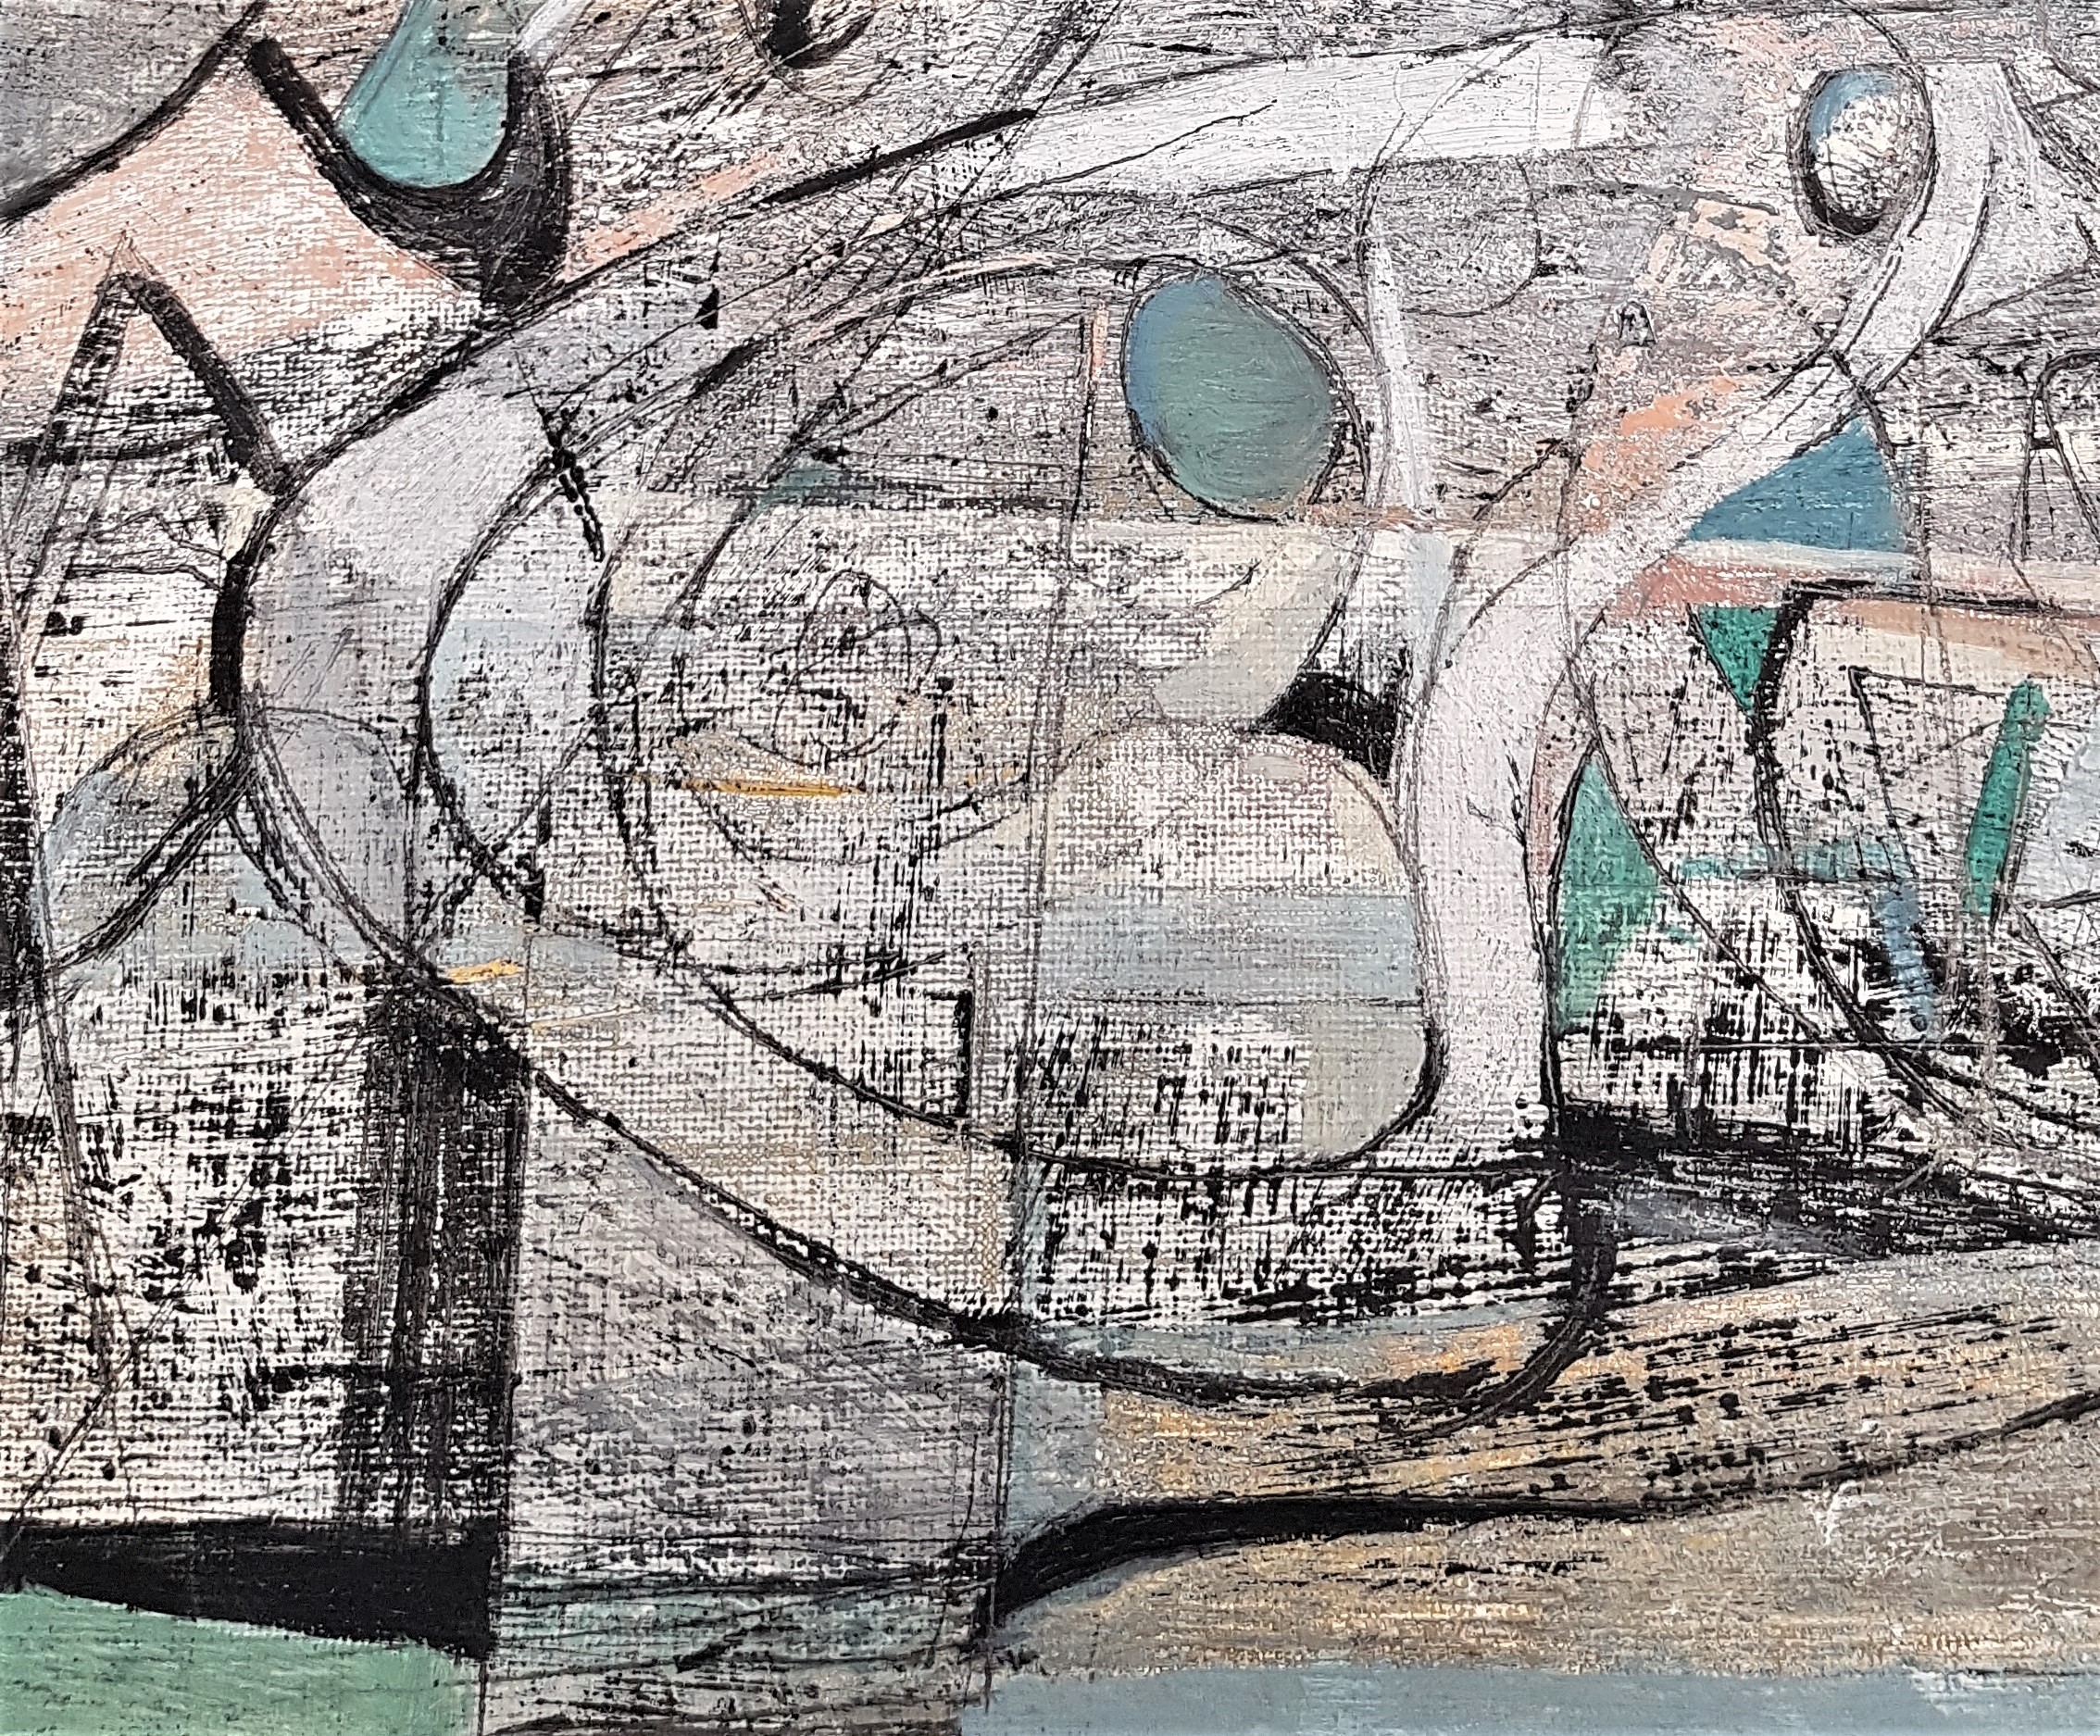 Detail of a painting. Abstract shapes mainly in white with areas of green and blue with black lines and scratches